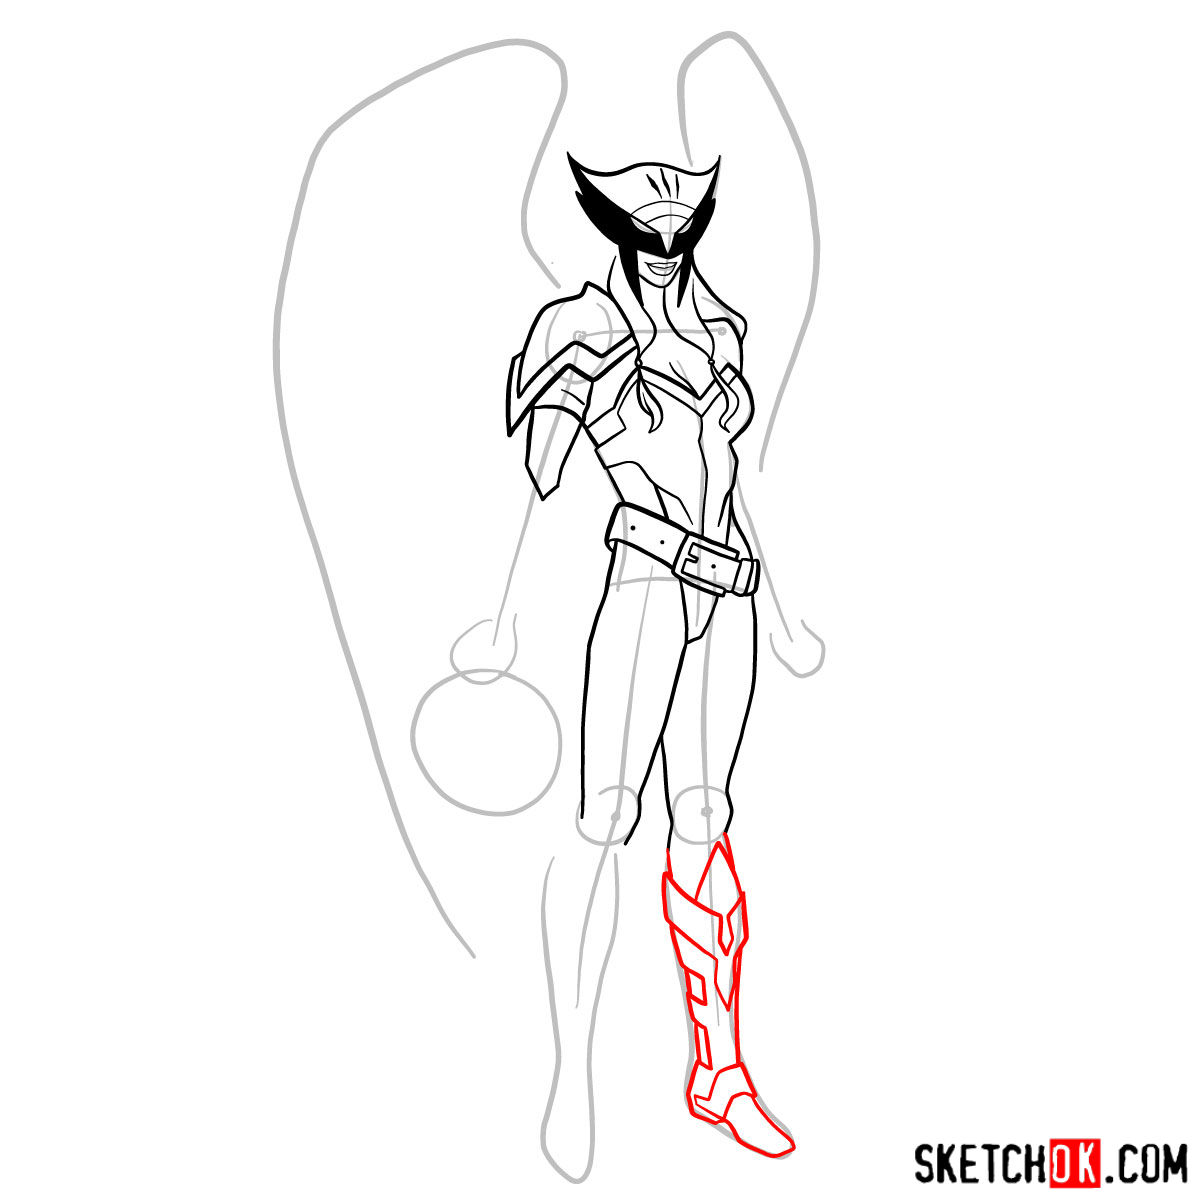 How to draw Hawkgirl DC superheroine - step 11